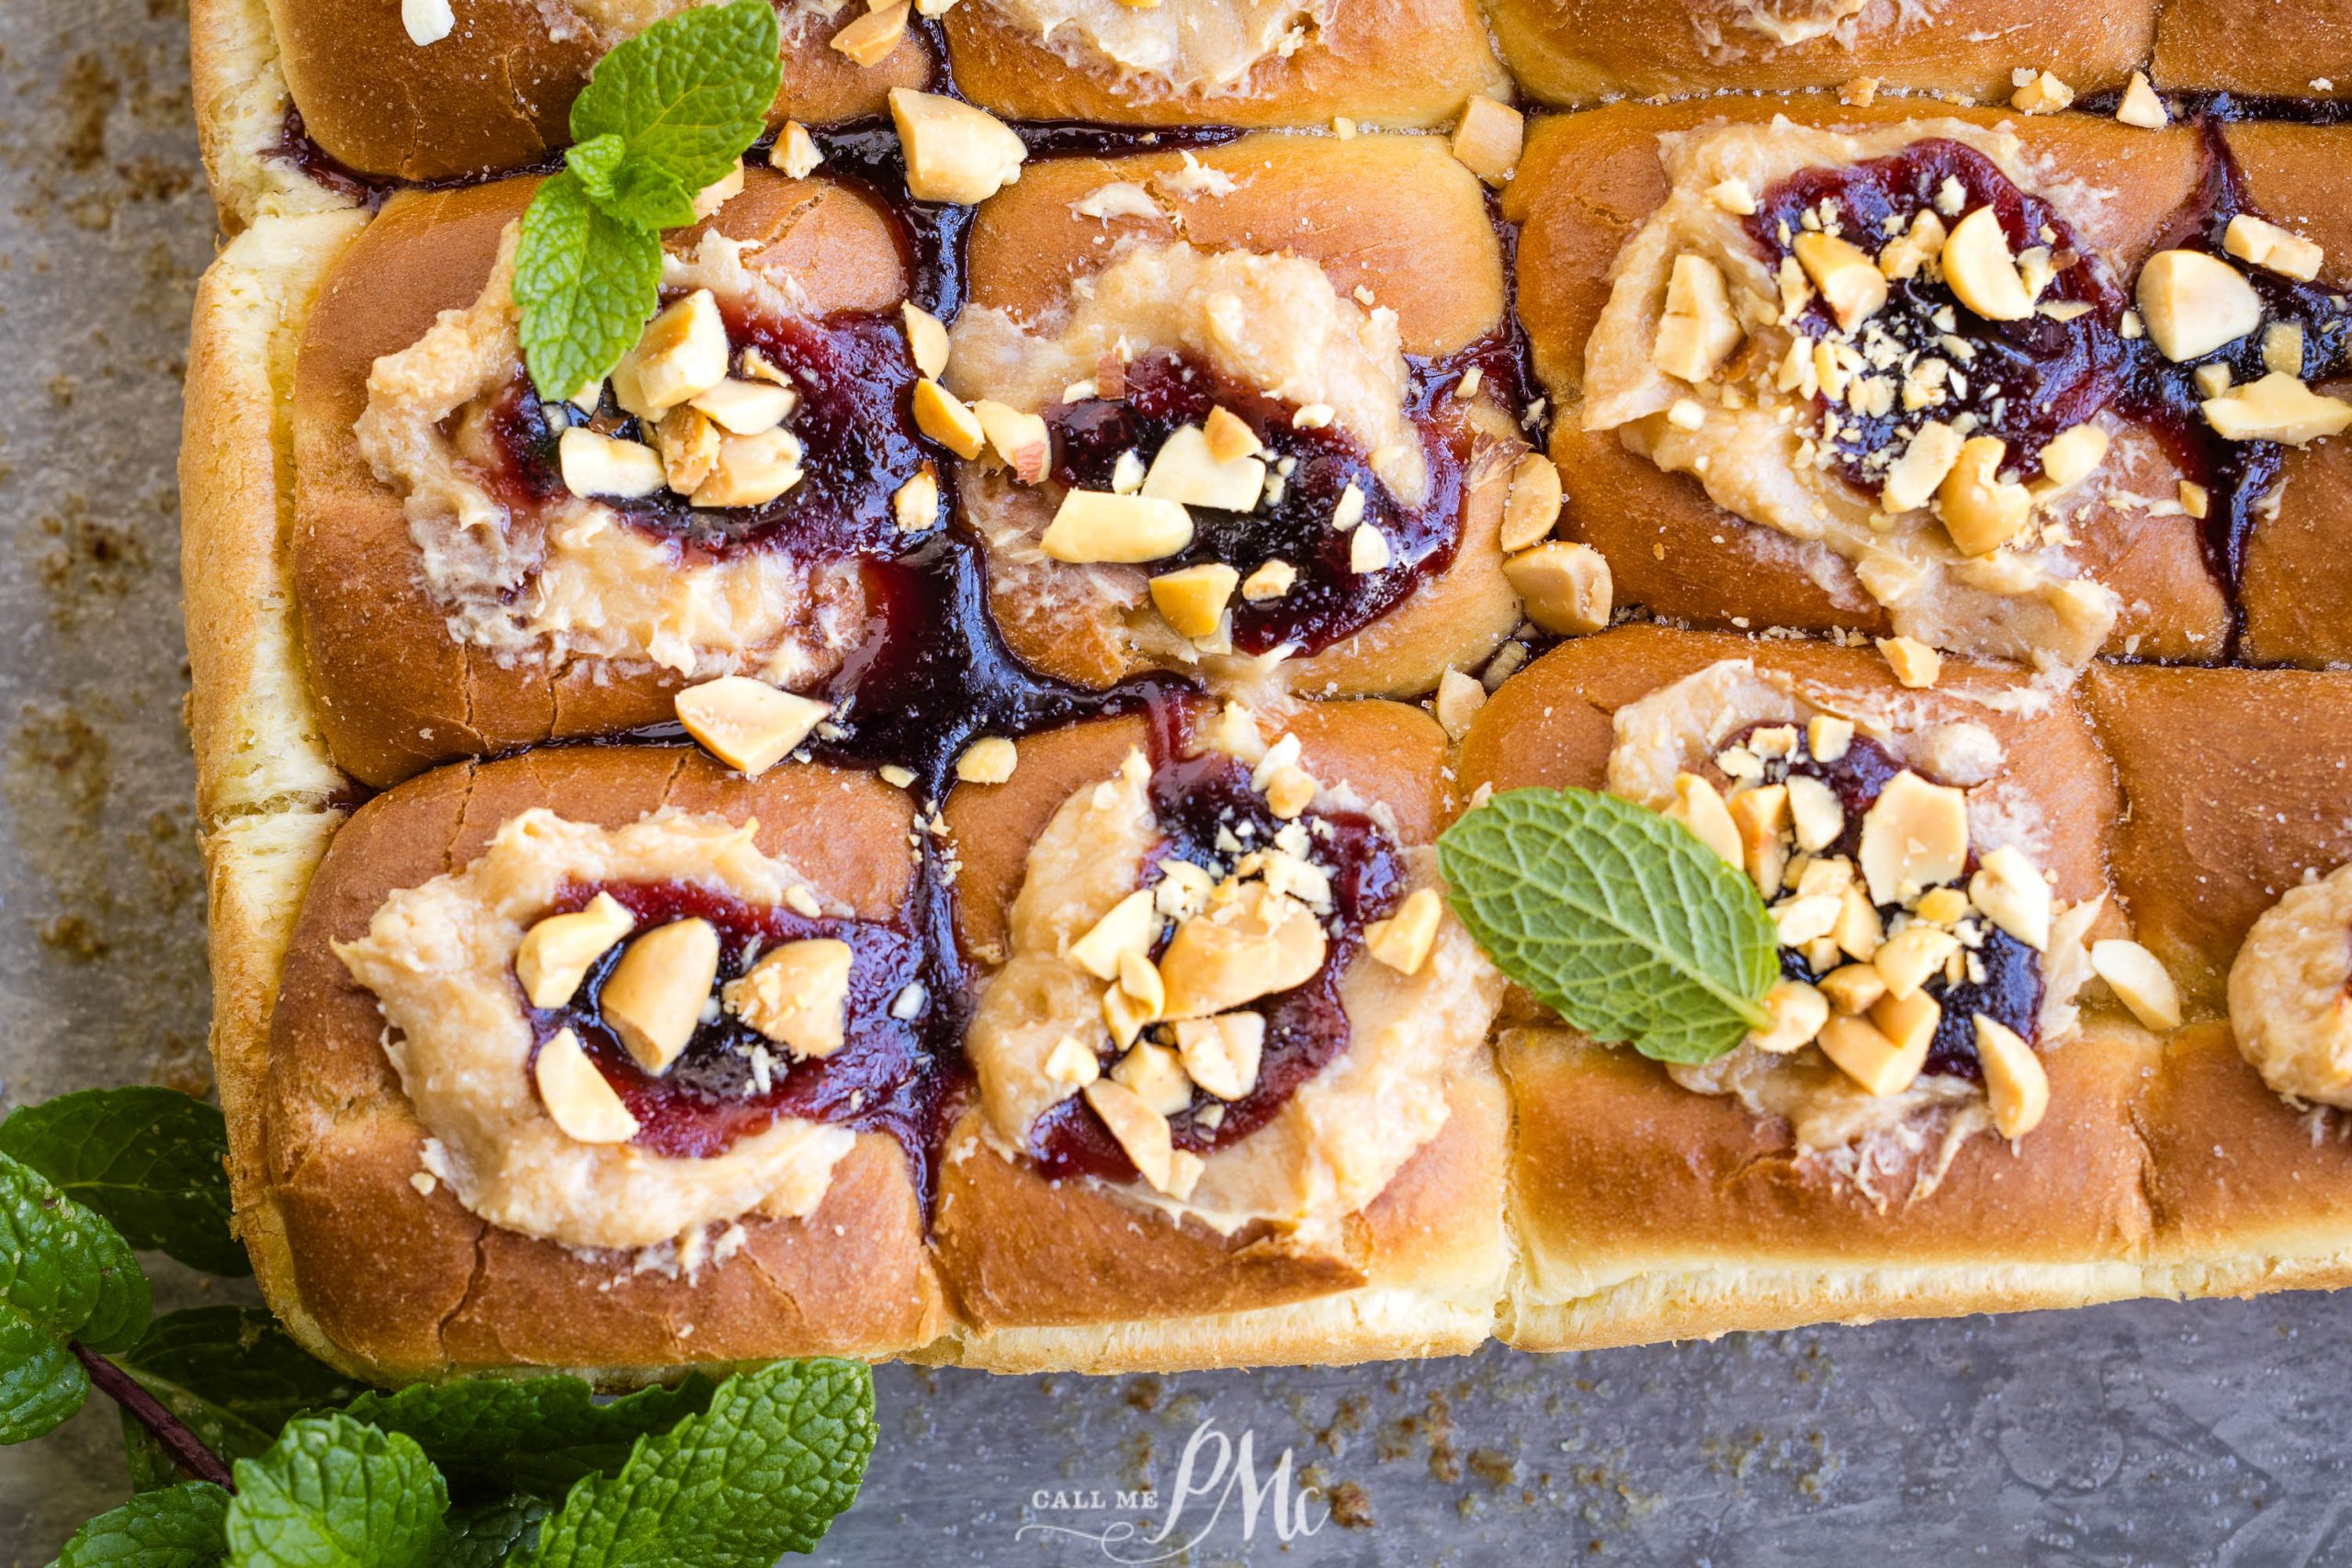 A close-up of a freshly baked Peanut Butter and Jelly Hawaiian Roll Cheese Danish with fruit jam, nuts, and peanut butter.